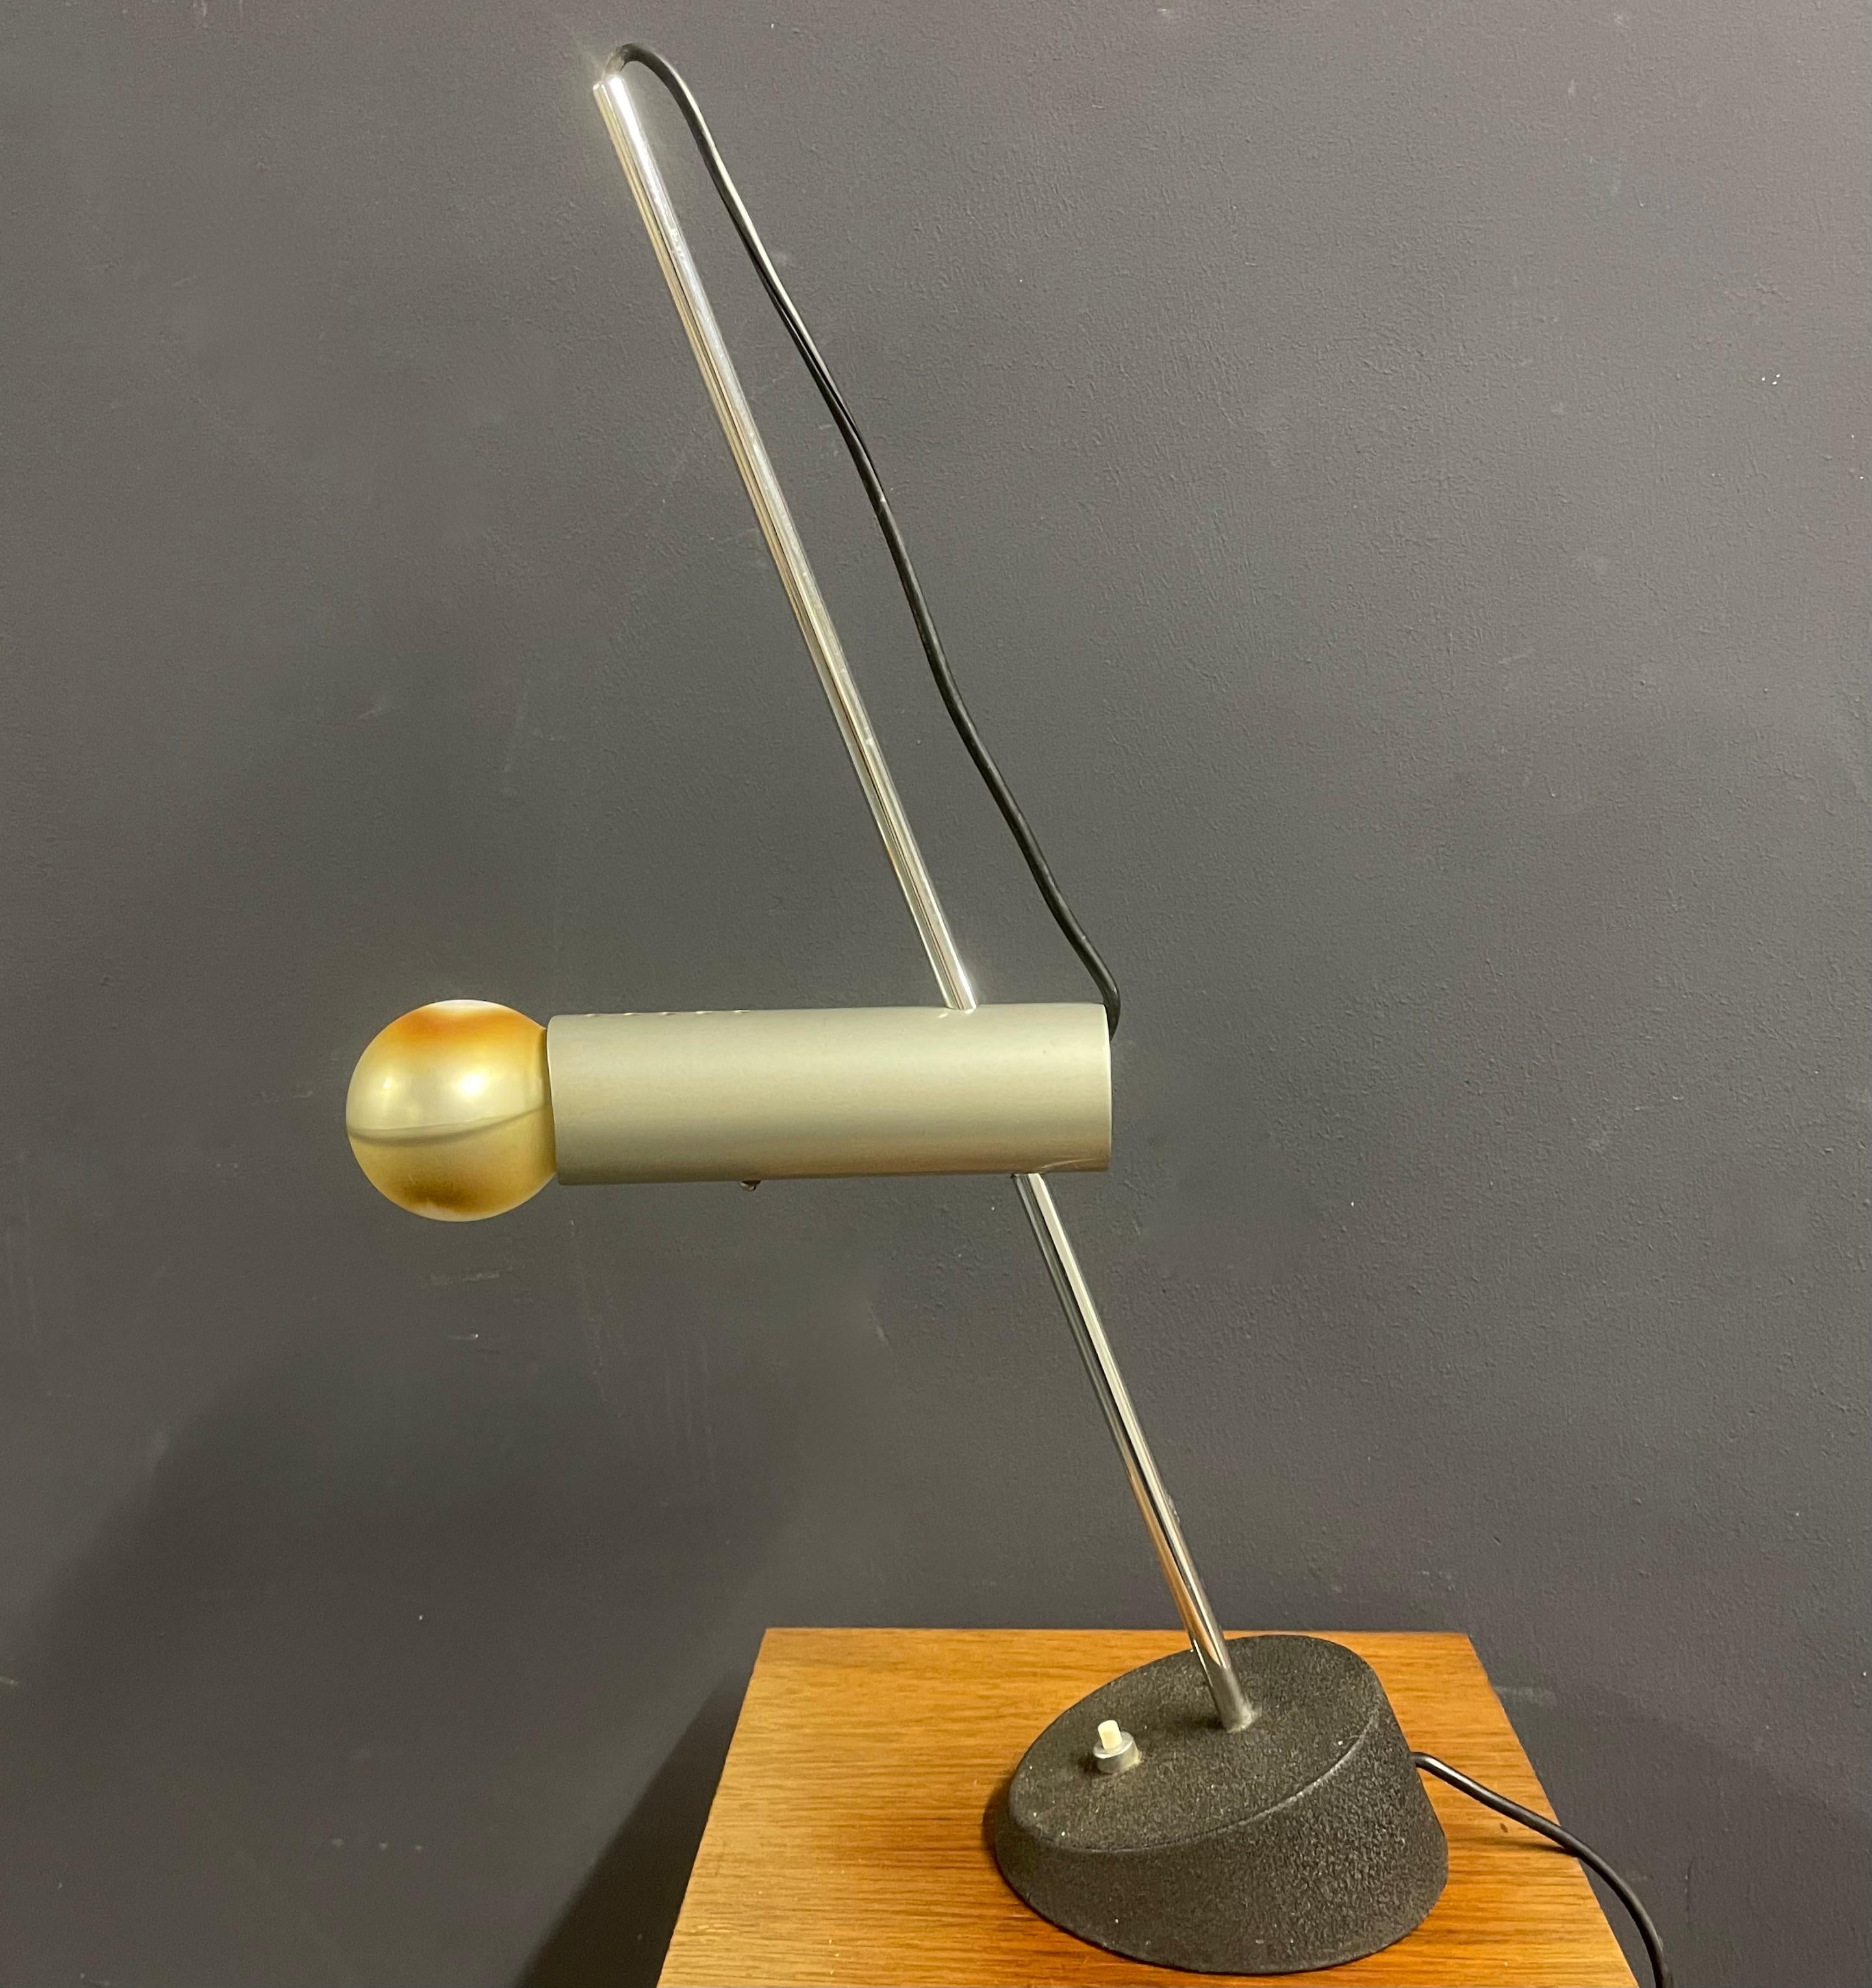 Rare and early table lamp by Gino Sarfatti for Arteluce. very futuristic for a lamp made in 1956!